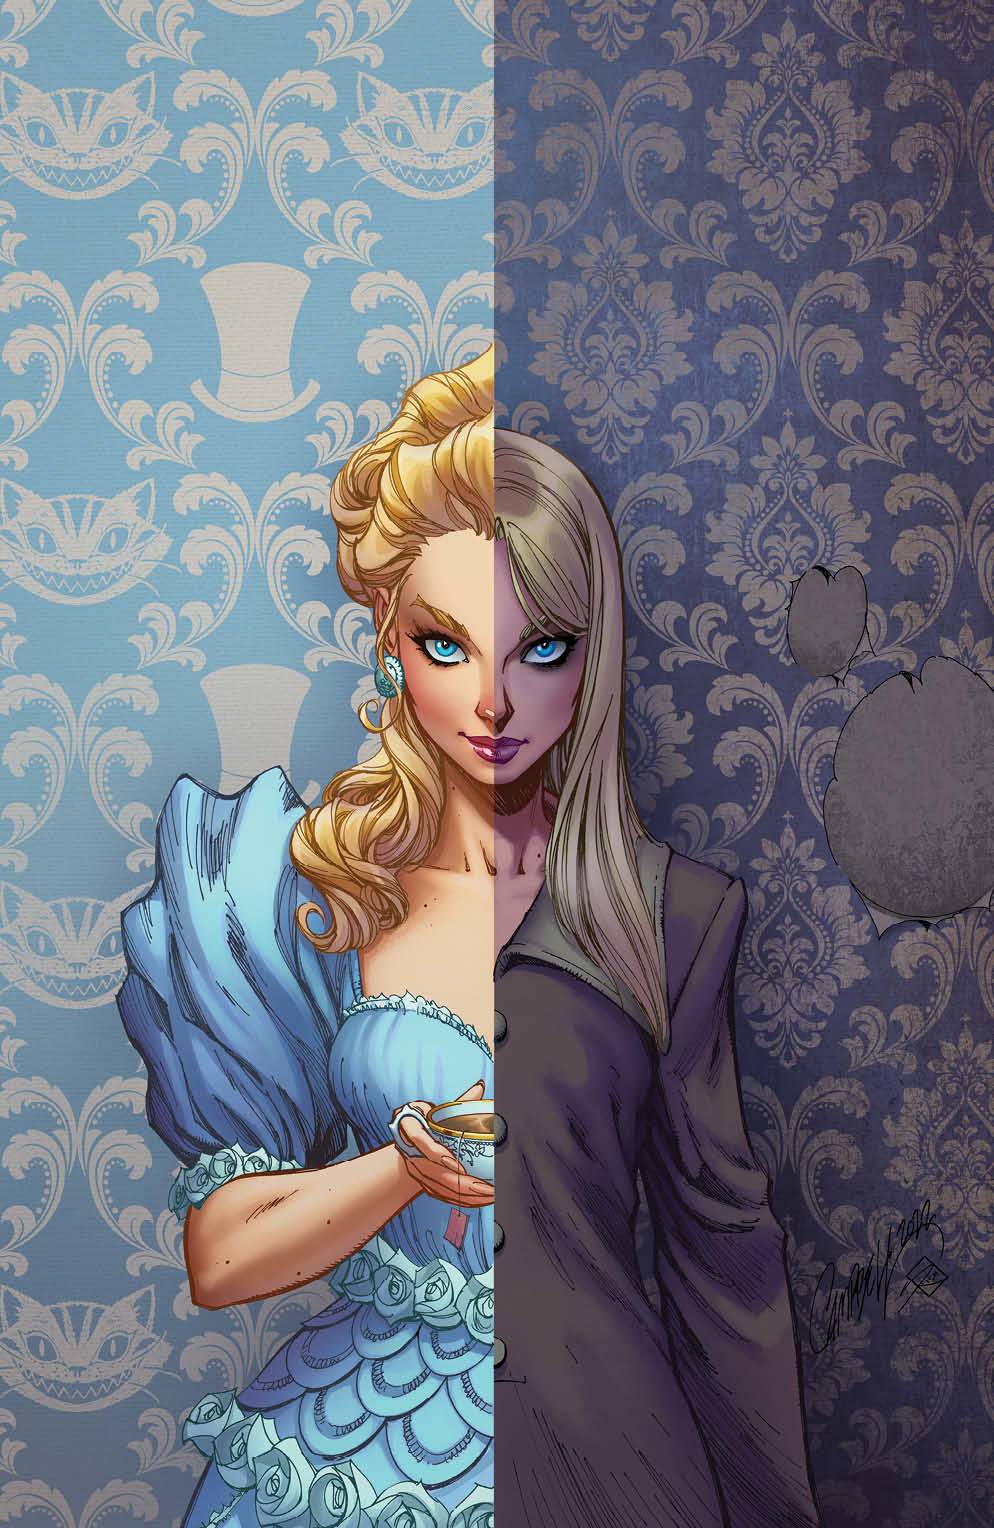 ALICE EVER AFTER #1 J SCOTT CAMPBELL 1:10 Ratio FOC Reveal Variant